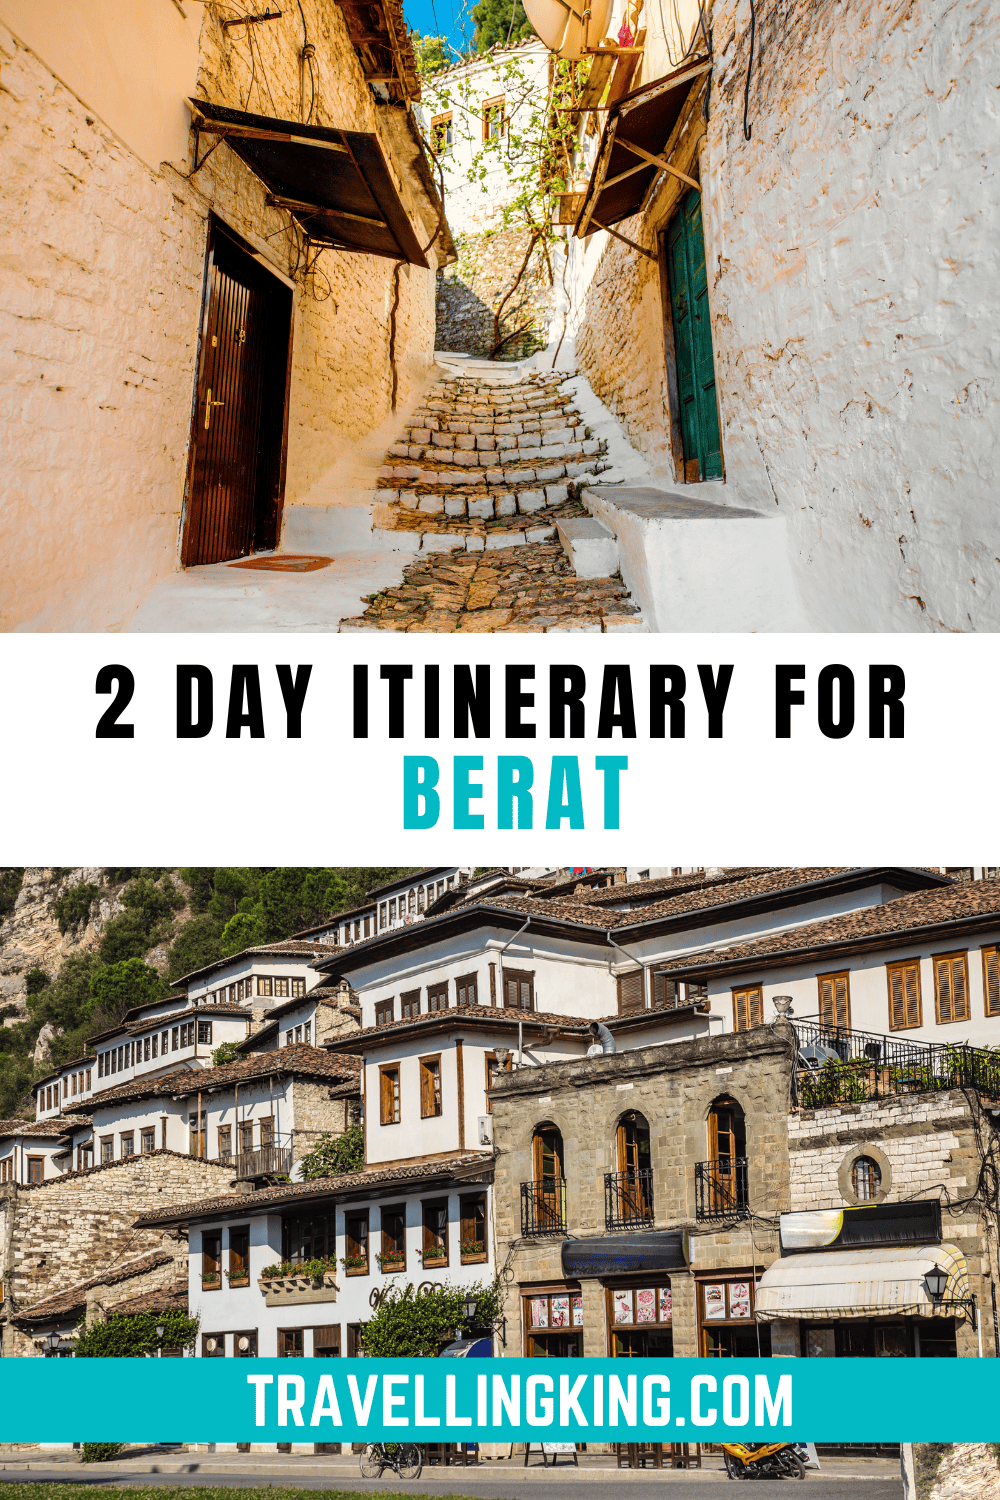 What to do in Berat in 48 hours 